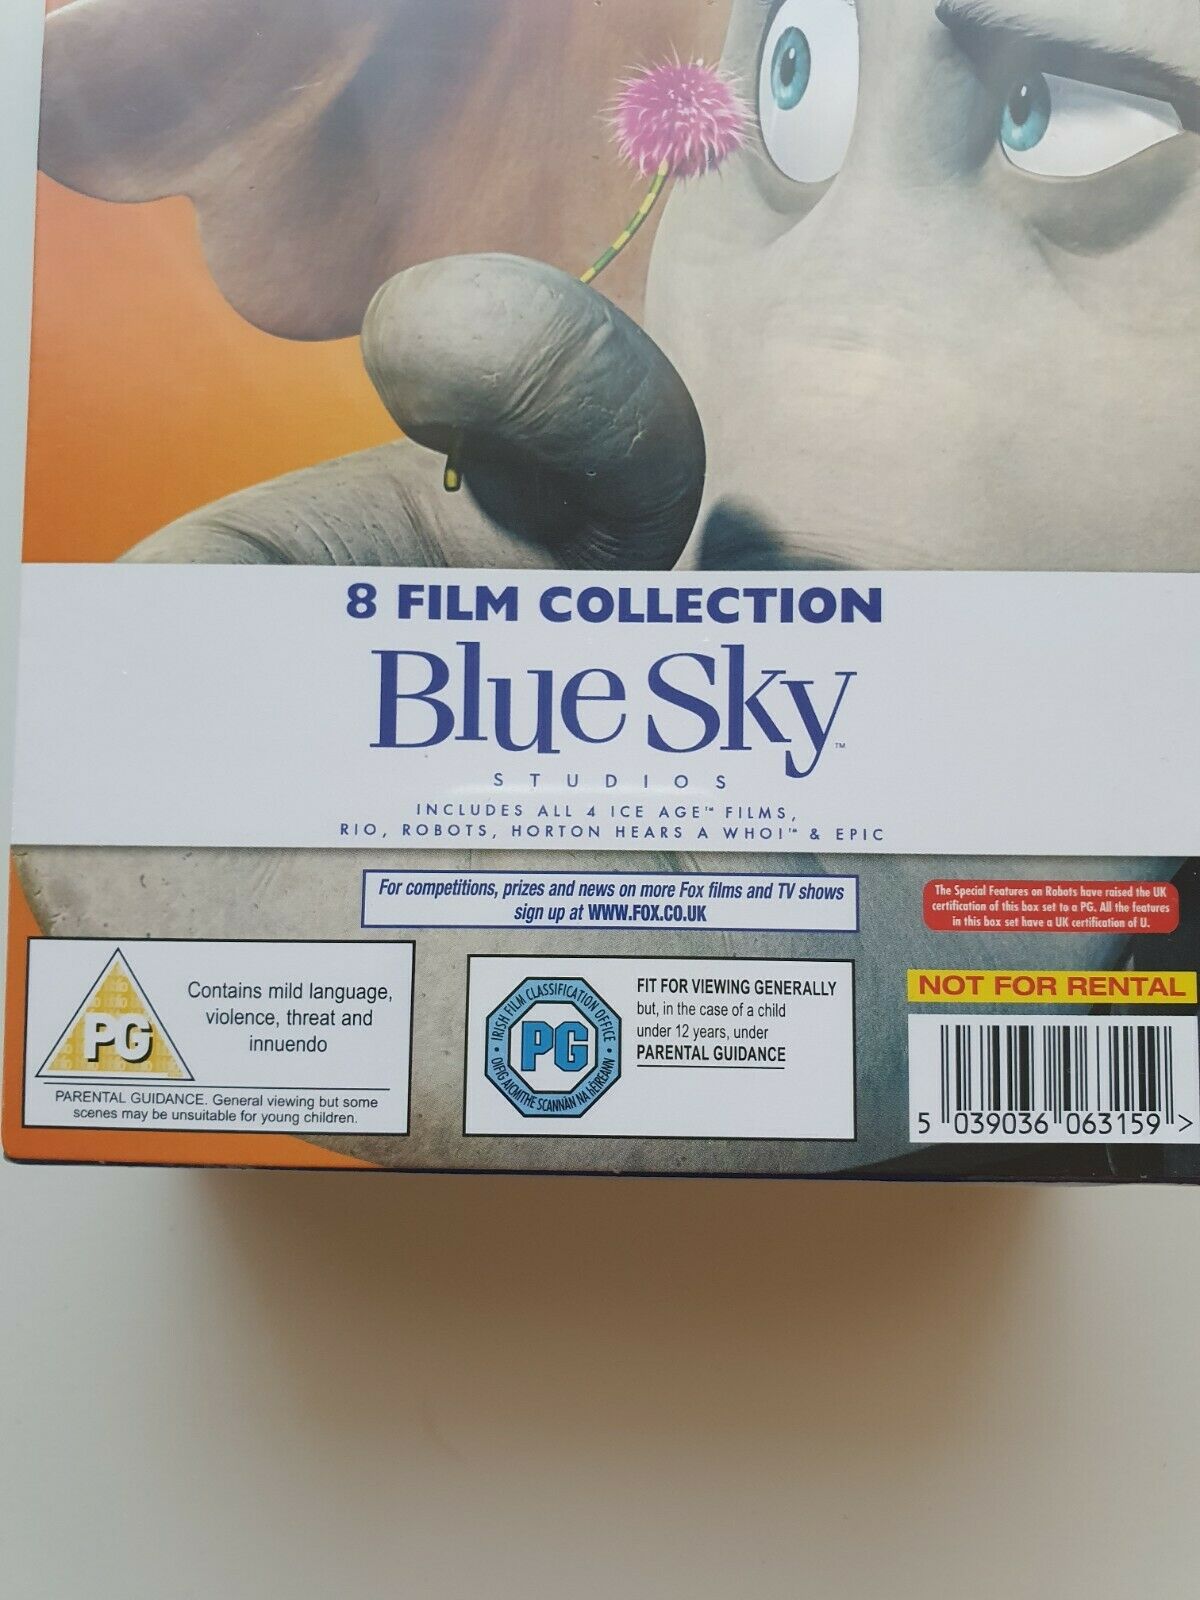 5039036063159 Blue Sky Studios 8 Film Collection DVD PG 2013 NEW SEALED